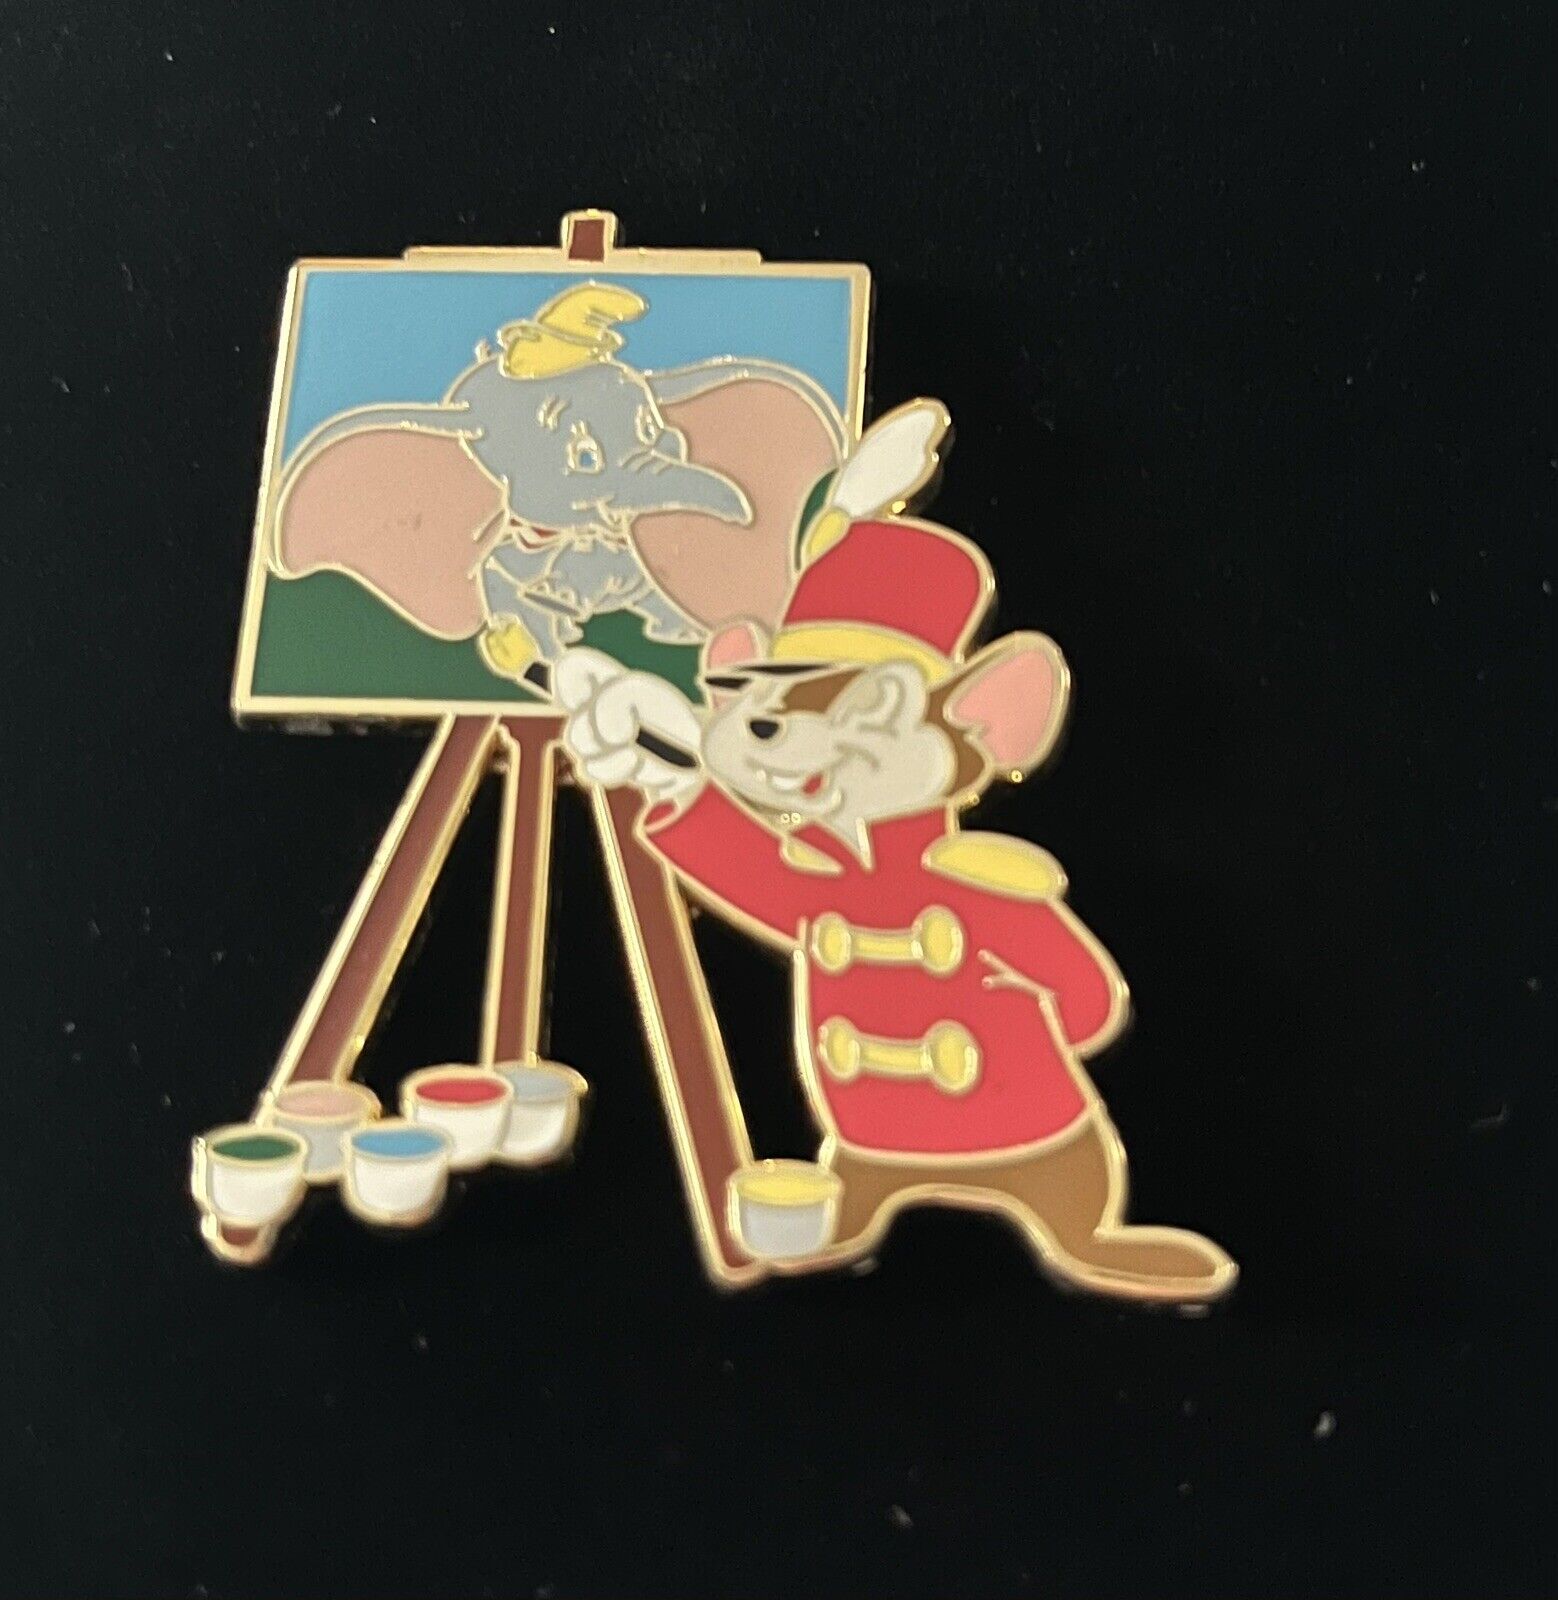 Disney Store.com Art Studio Series Timothy Mouse And Dumbo Pin LE 250 NOC 2009